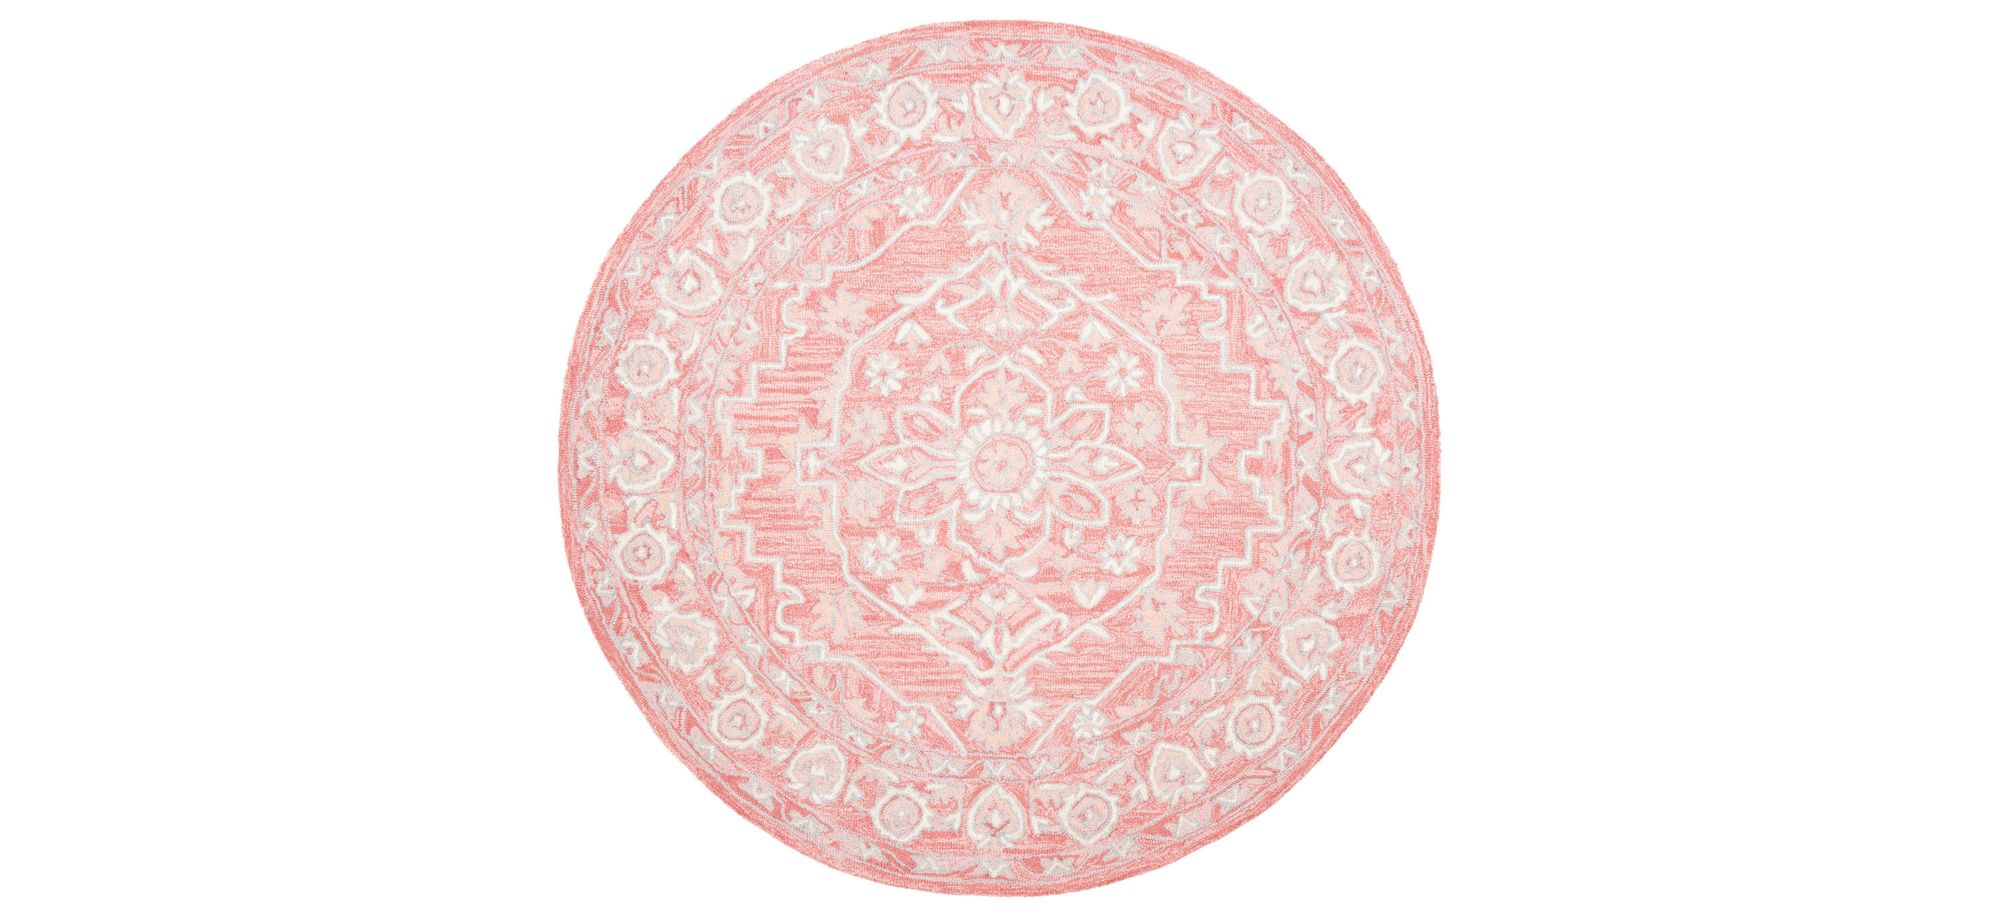 Far Out Area Rug in Pink & Cream by Safavieh